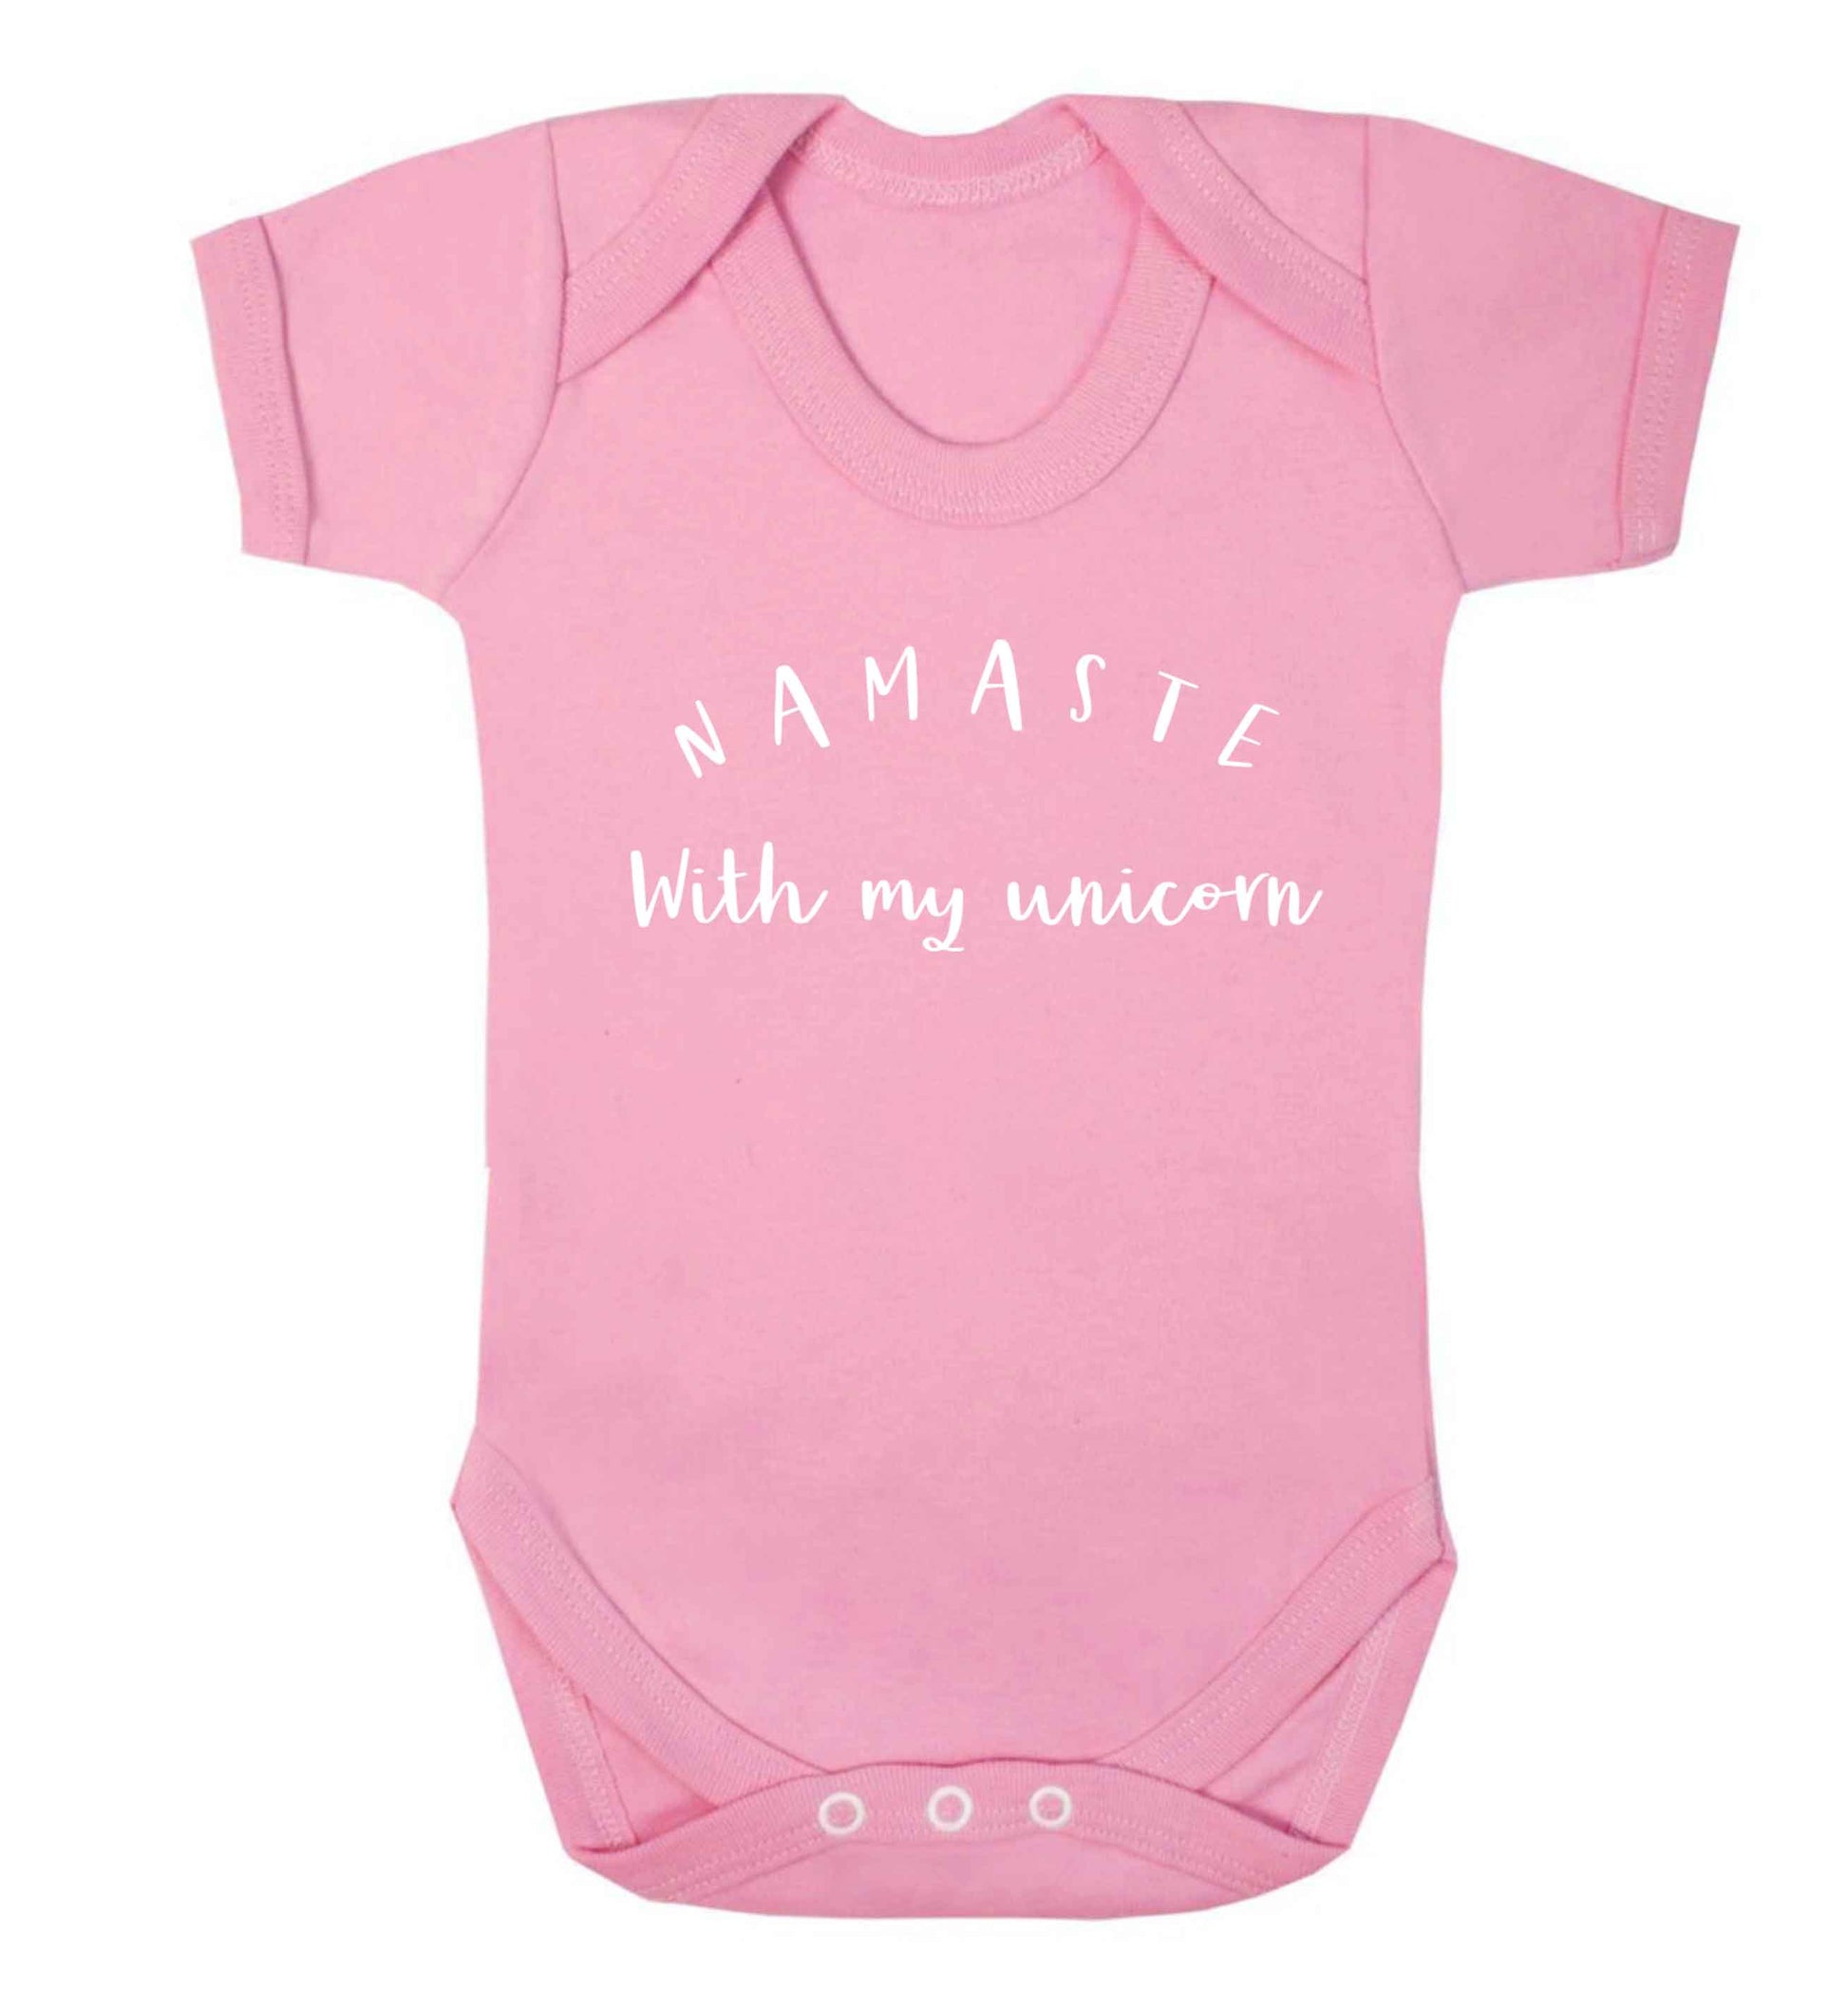 Namaste with my unicorn Baby Vest pale pink 18-24 months